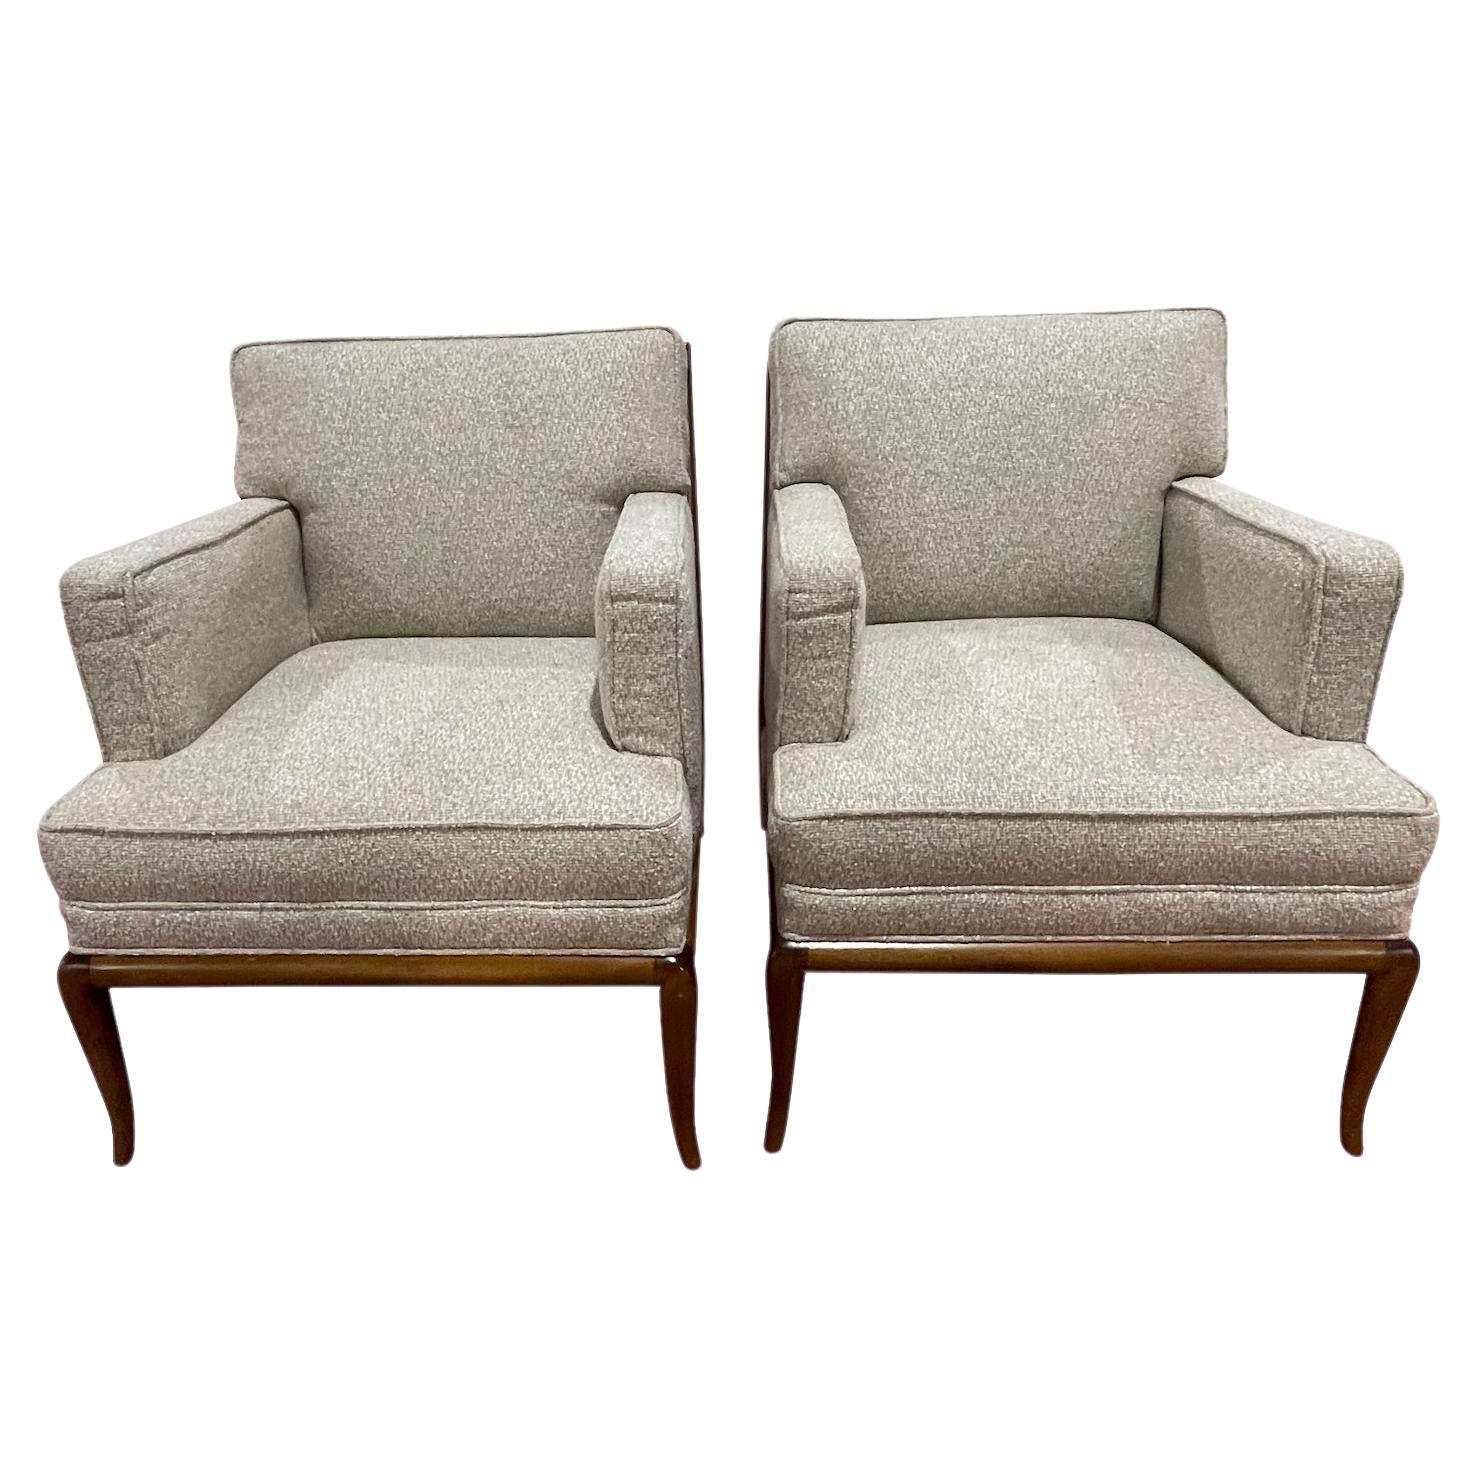 Wood Frame Pair Upholstered Chairs By Robsjohn-Gibbings, United States, 1950s For Sale